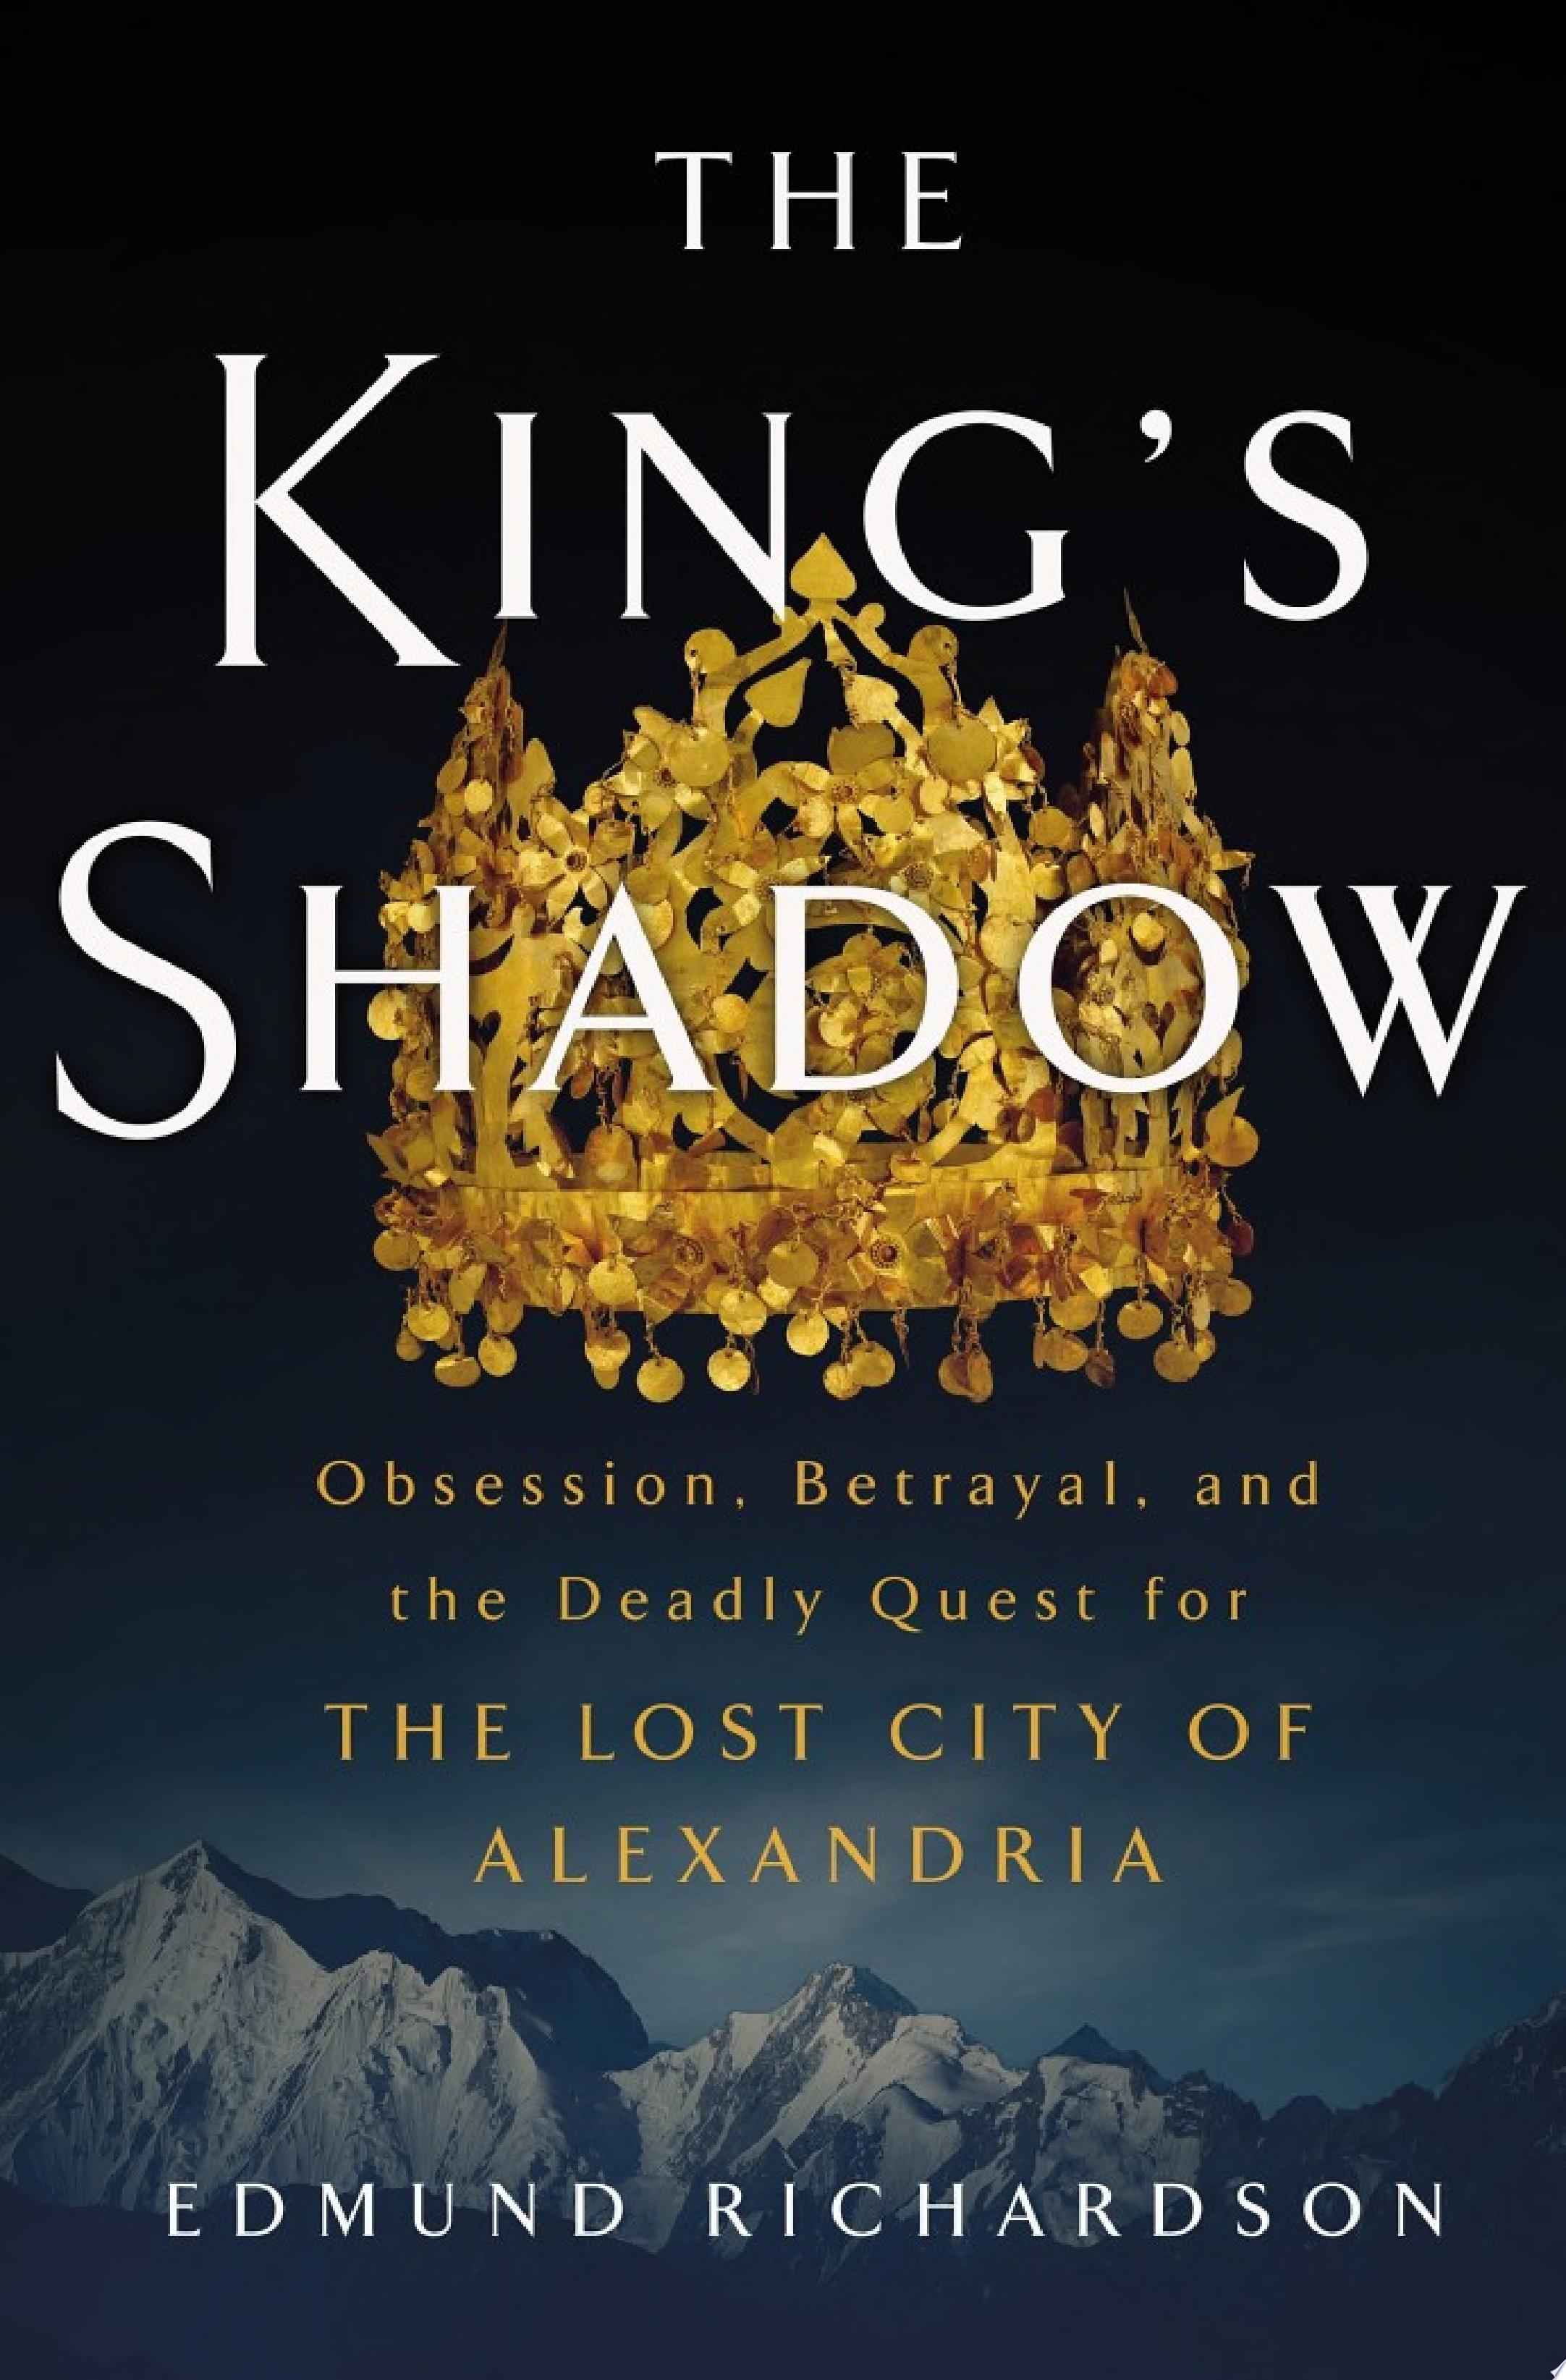 Image for "The King's Shadow"